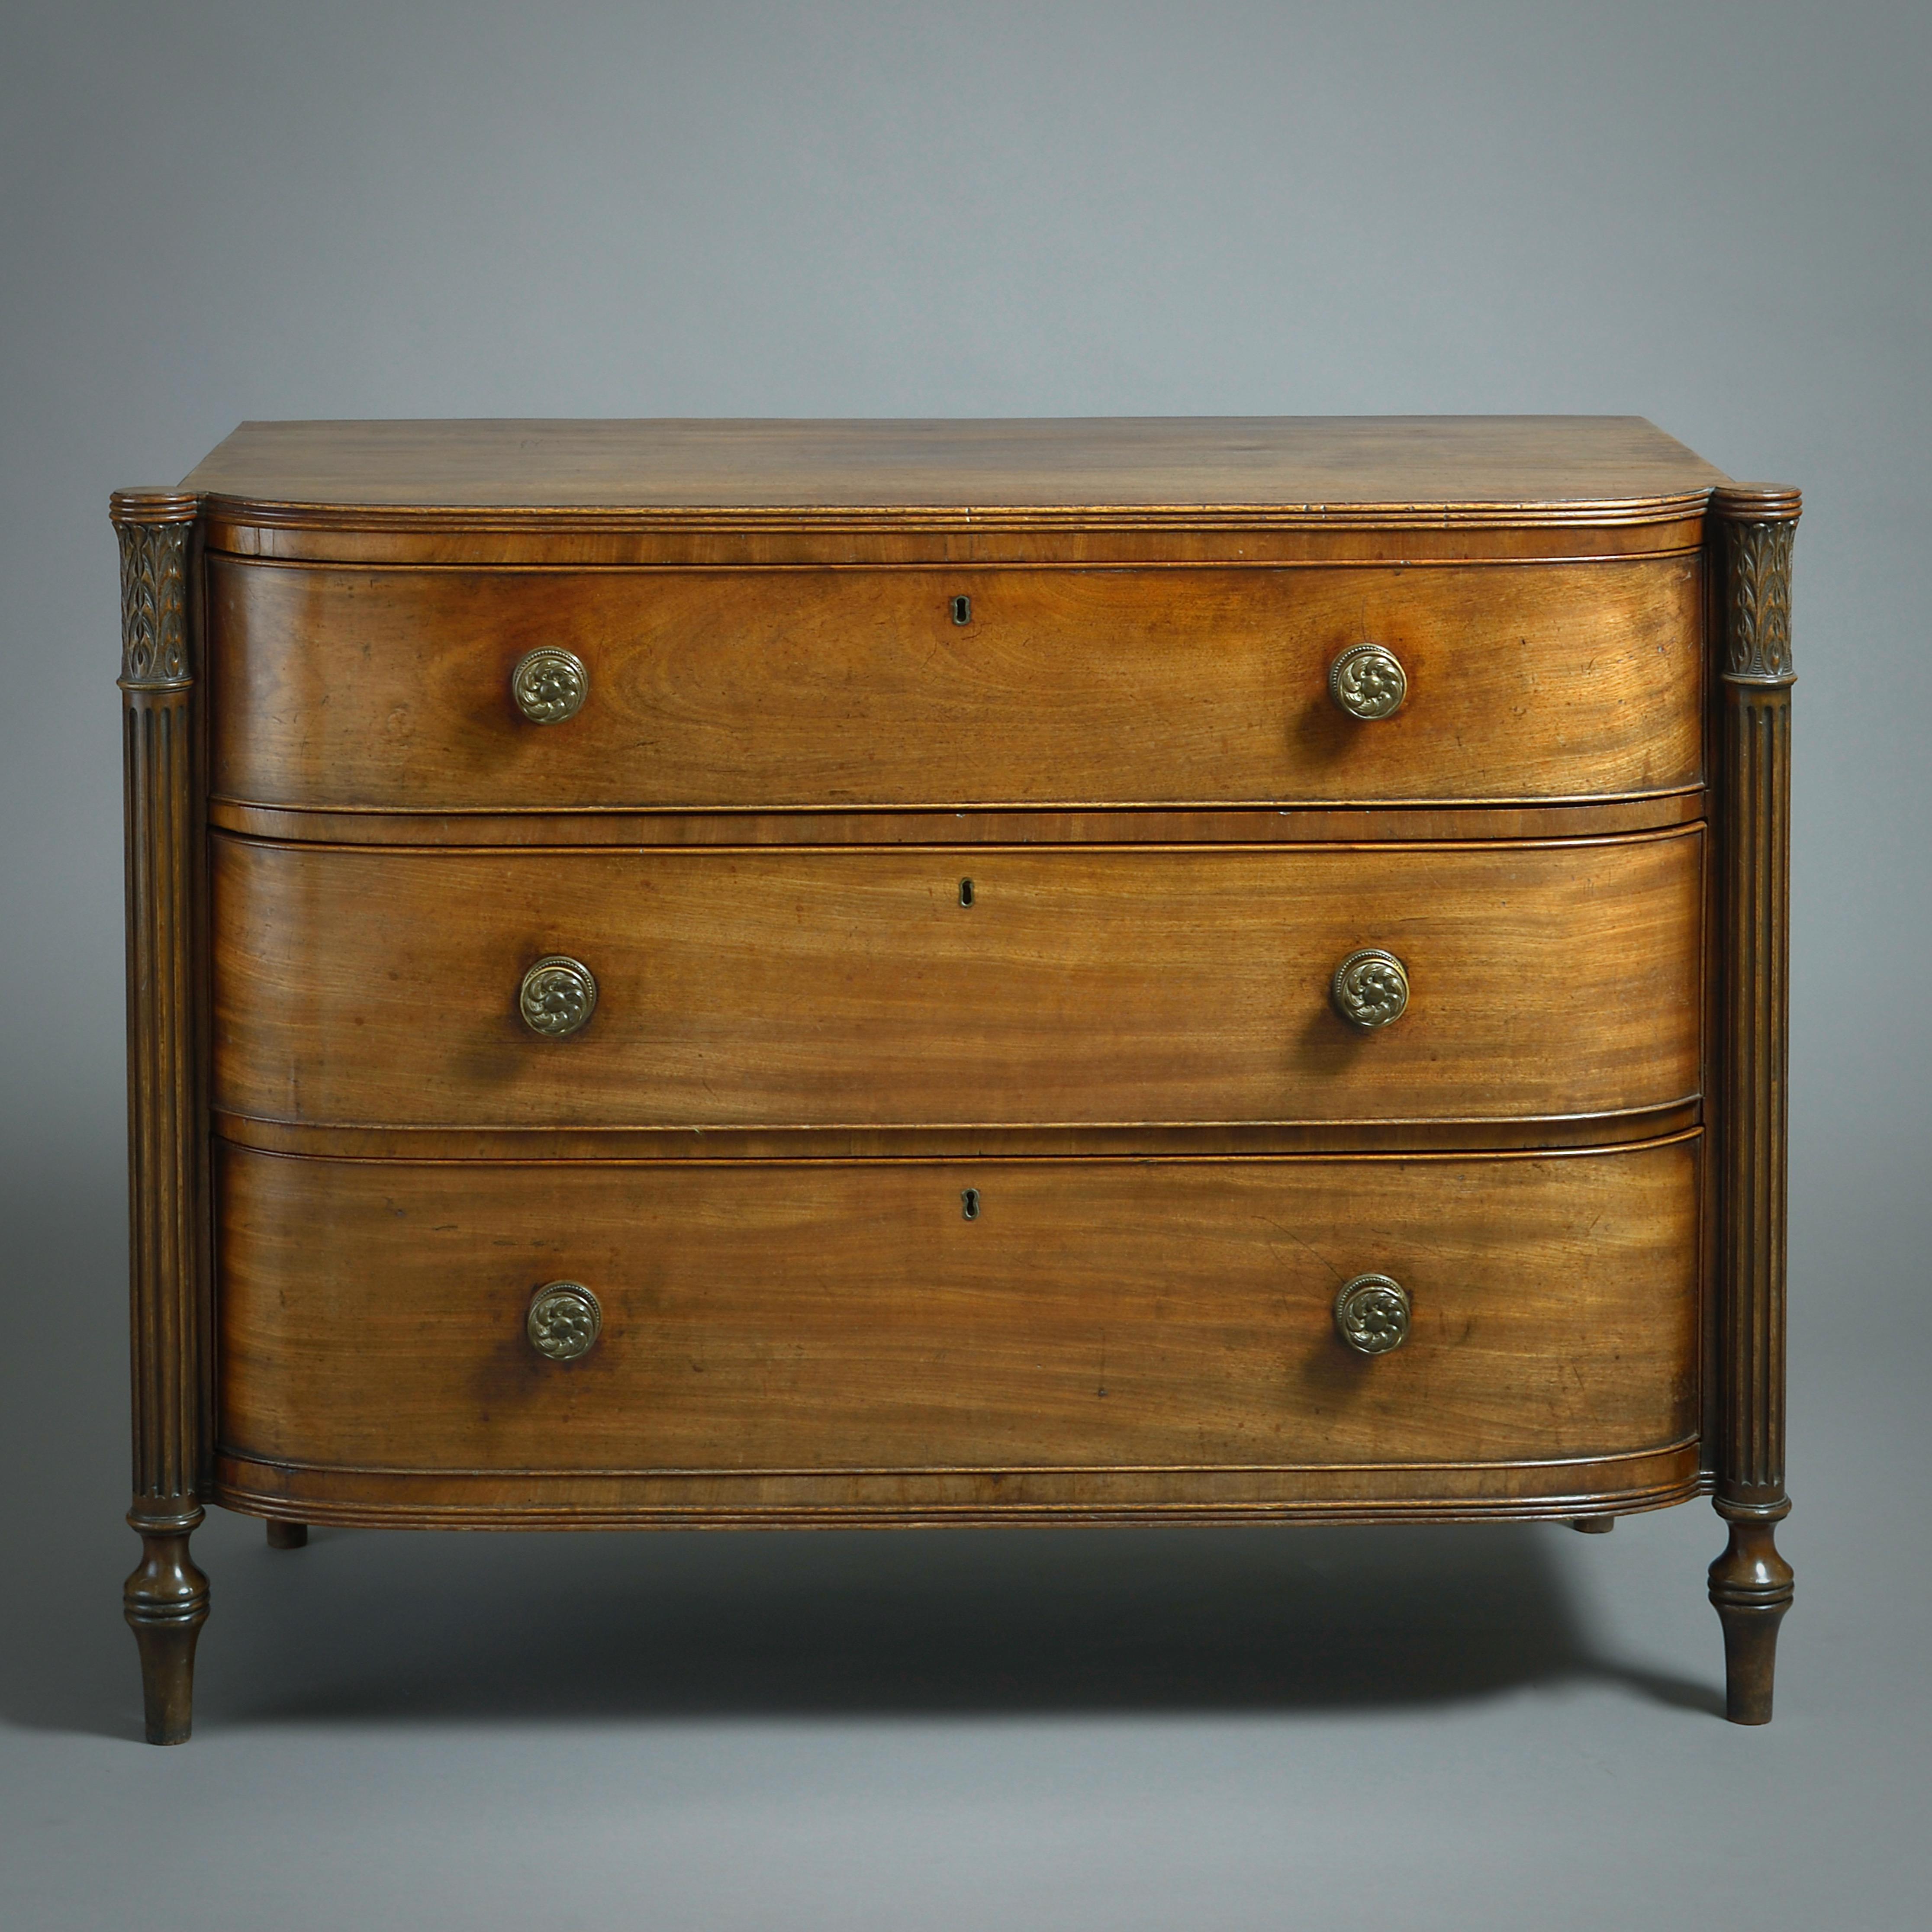 A FINE PAIR OF GEORGE III MAHOGANY D-SHAPED COMMODES, CIRCA 1800.

Each with three drawers fitted with their original brass handles between reeded three-corner columns with stiff-leaf capitals.